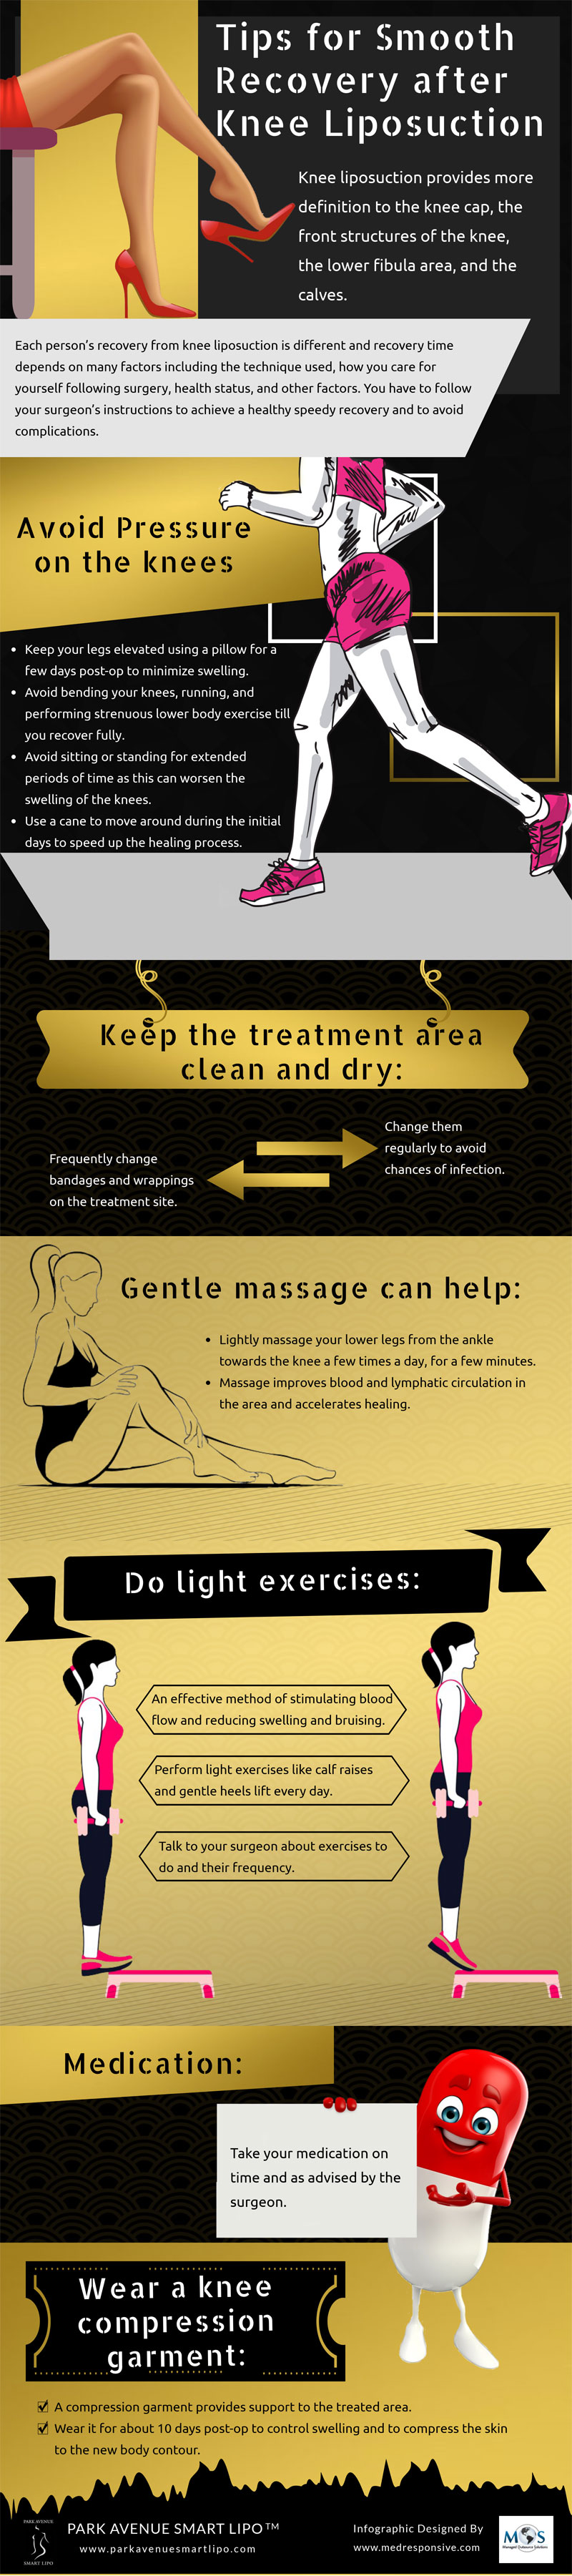 Tips for Smooth Recovery after Knee Liposuction [Infographic]